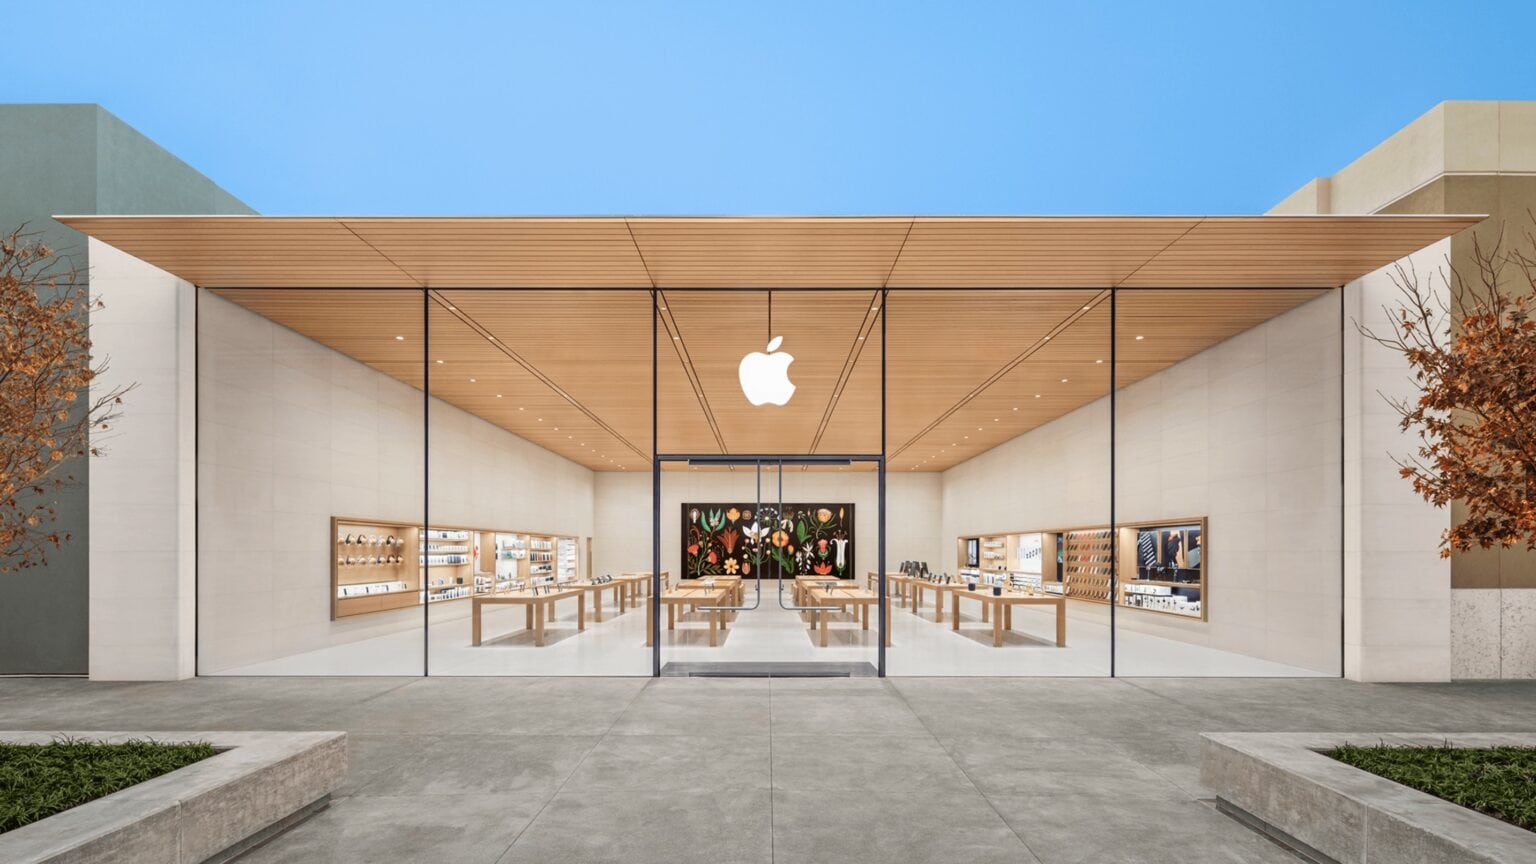 Crafty burglers cut through Apple store wall to steal piles of iPhones